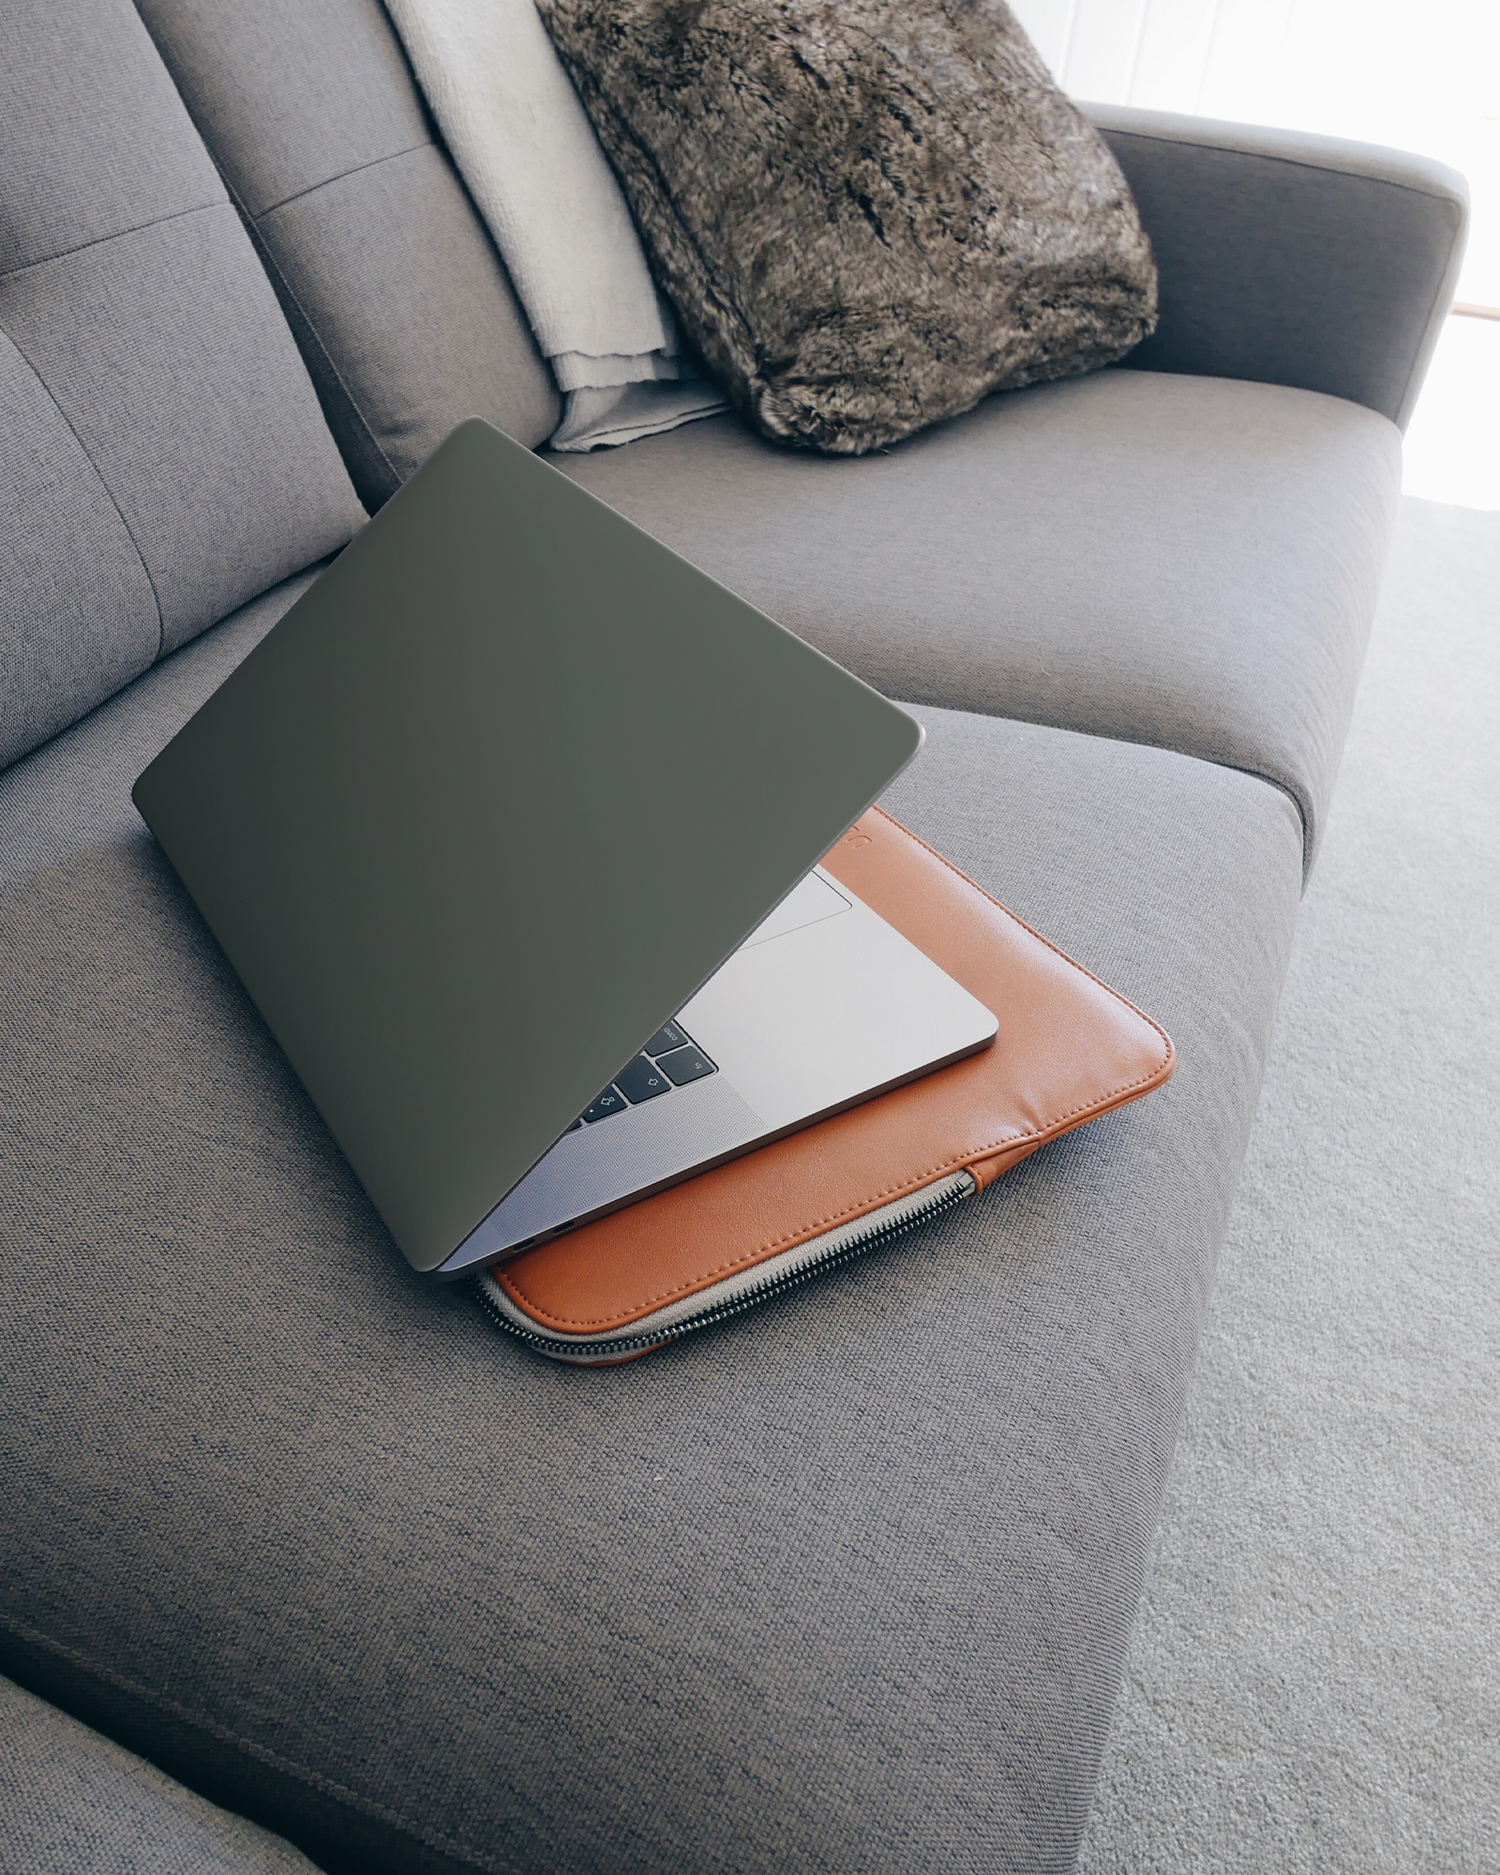 MIDNIGHT GREEN Laptop Skin for 15 inch Apple MacBooks on a couch